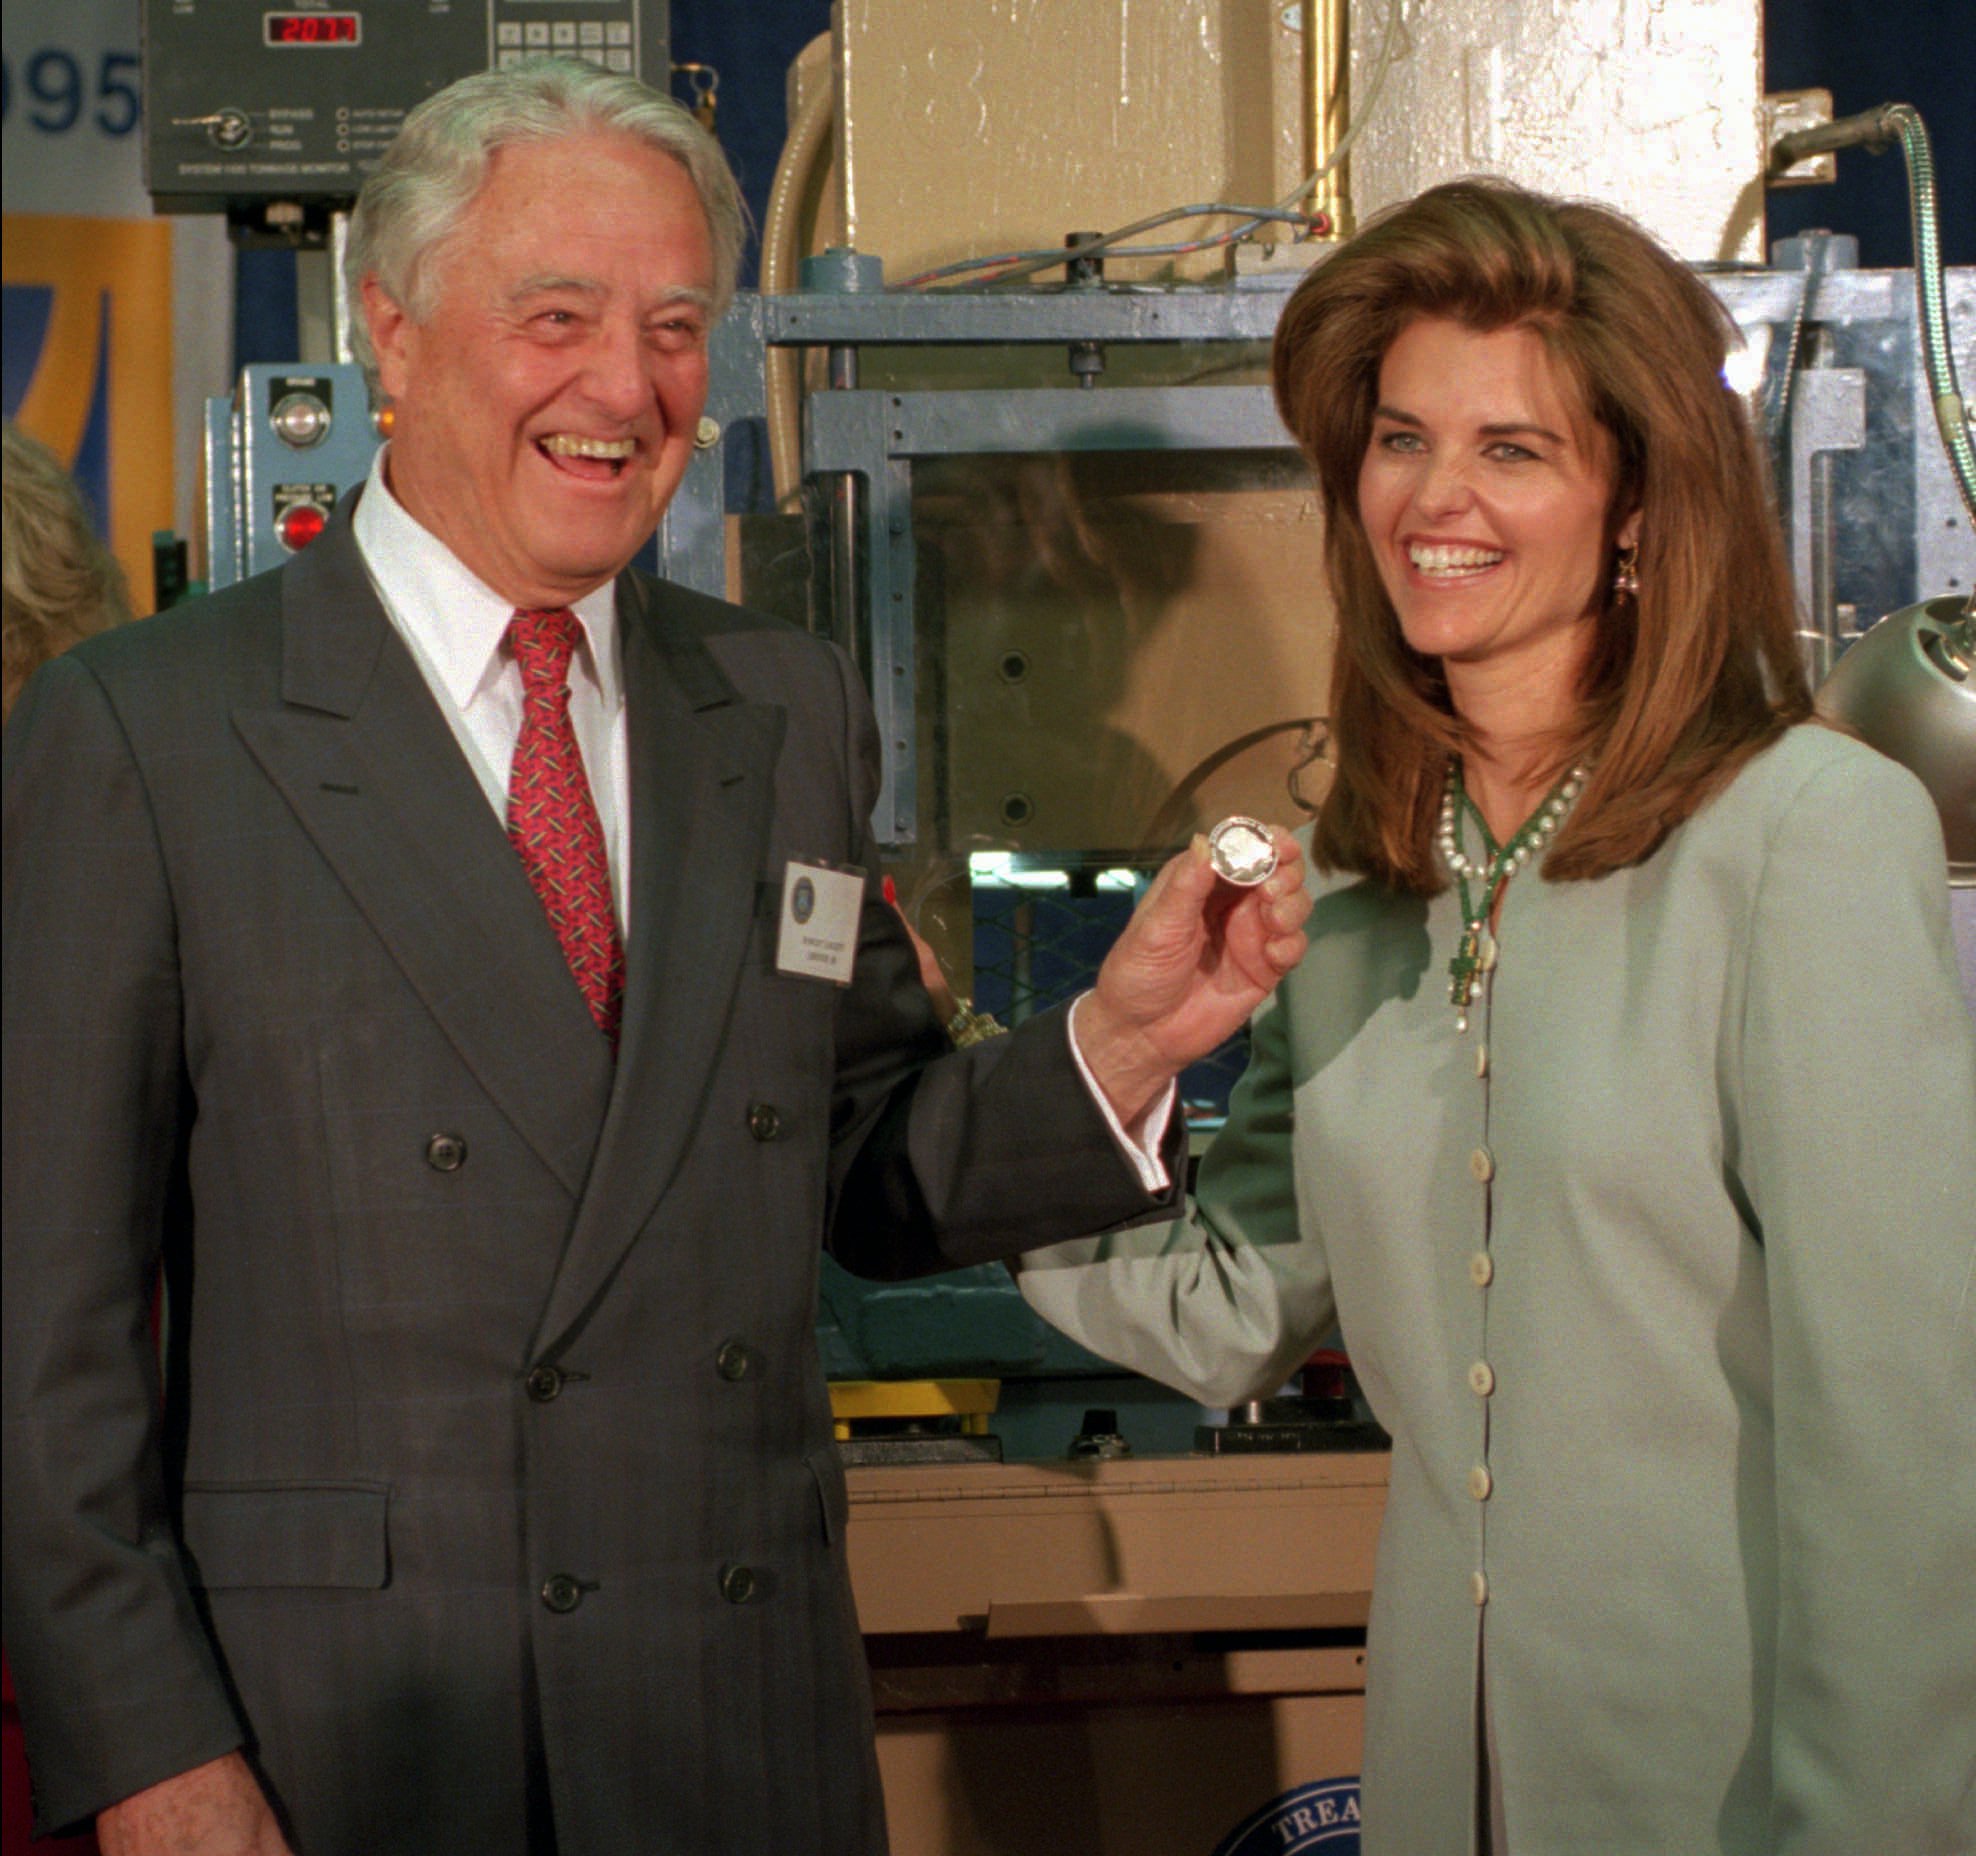 R. Sargent Shriver and his daughter, Maria, hold a newly minted commemorative silver dollar coin honoring his wife, Eunice Kennedy Shriver, at the U.S. Mint in Philadelphia, in 1995. (Nanine Hartzenbusch/AP)